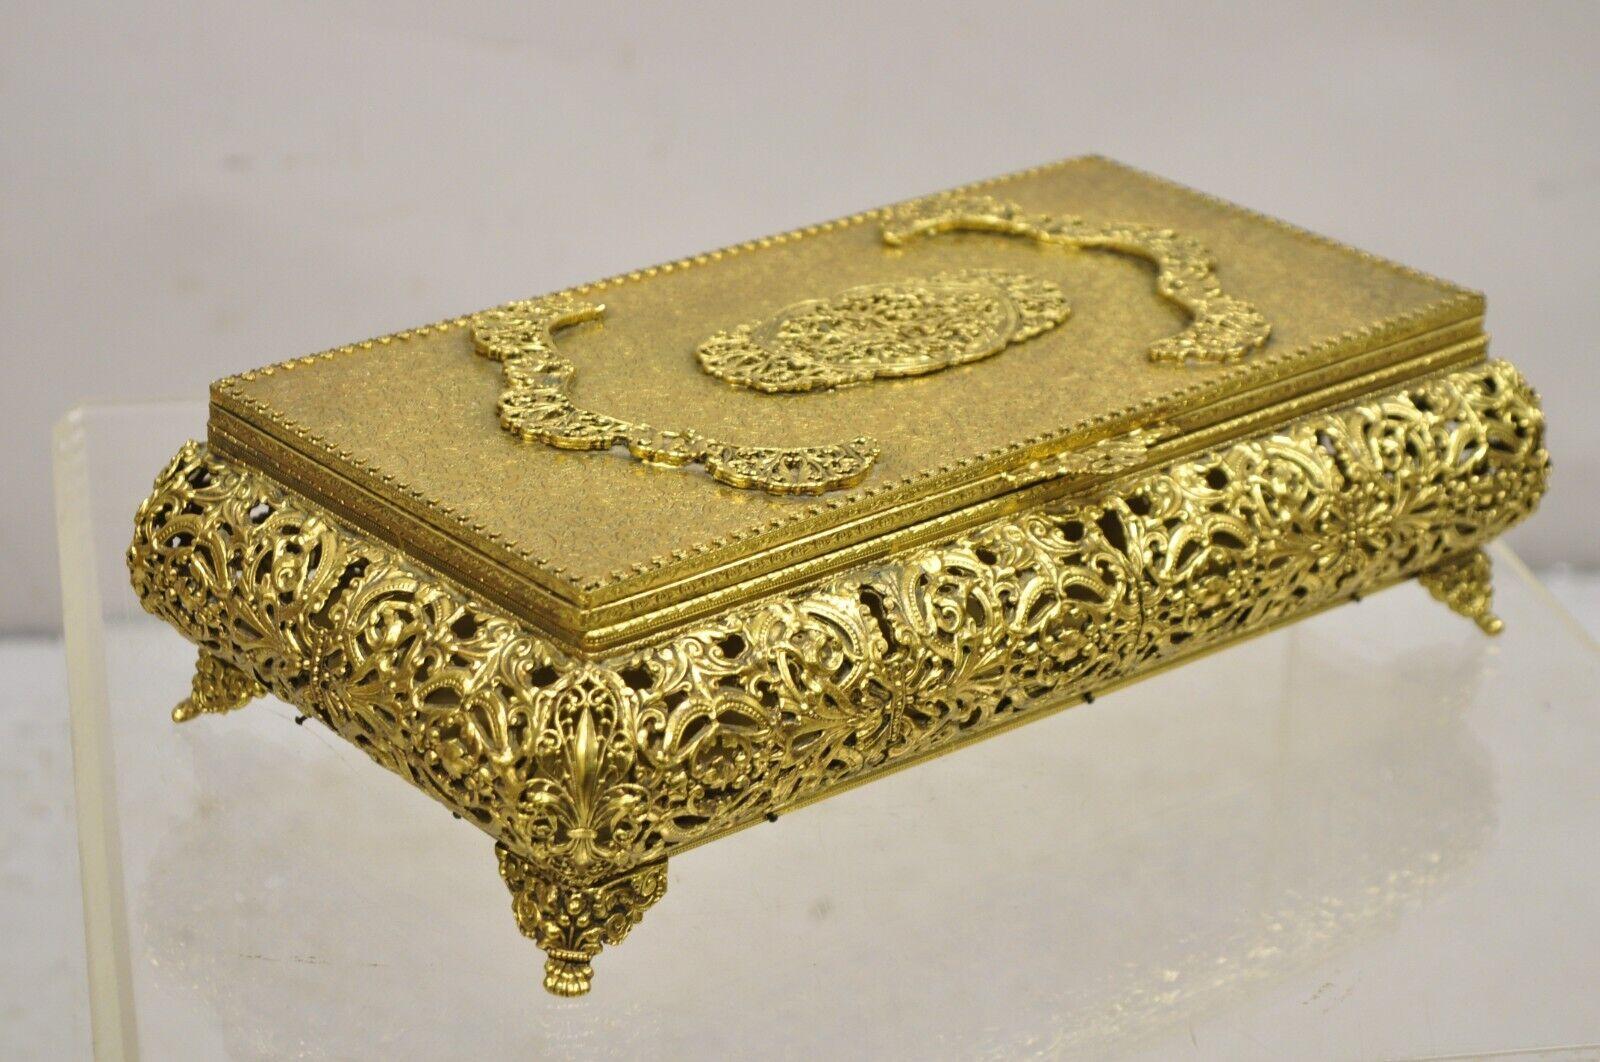 Vtg French Hollywood Regency Style Gold Filigree Vanity Jewelry Box by Globe For Sale 6